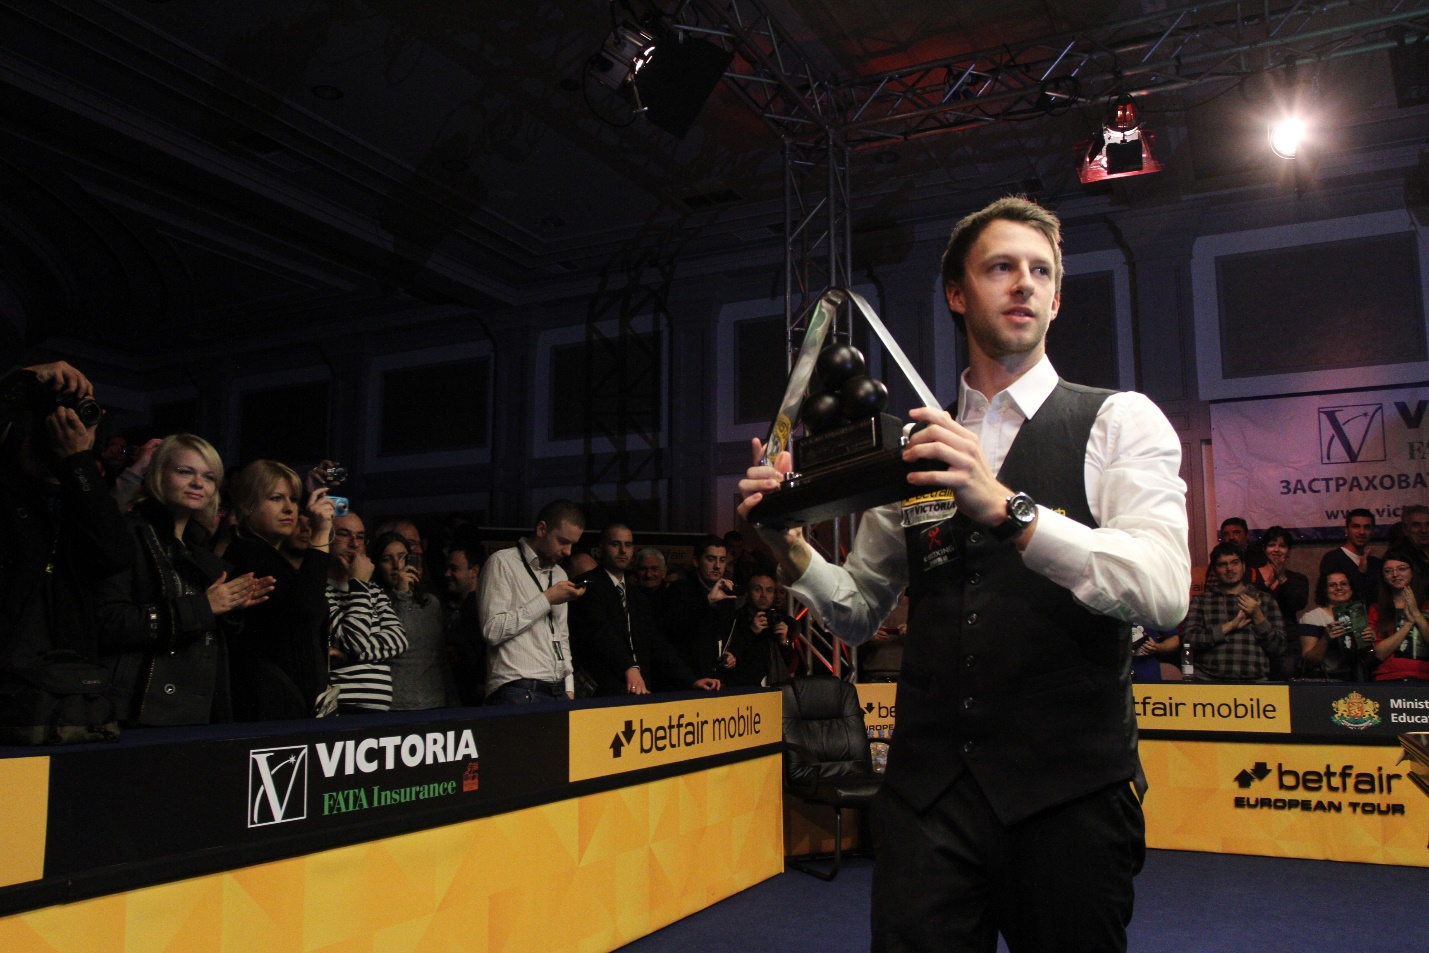 A snooker player holding his trophy